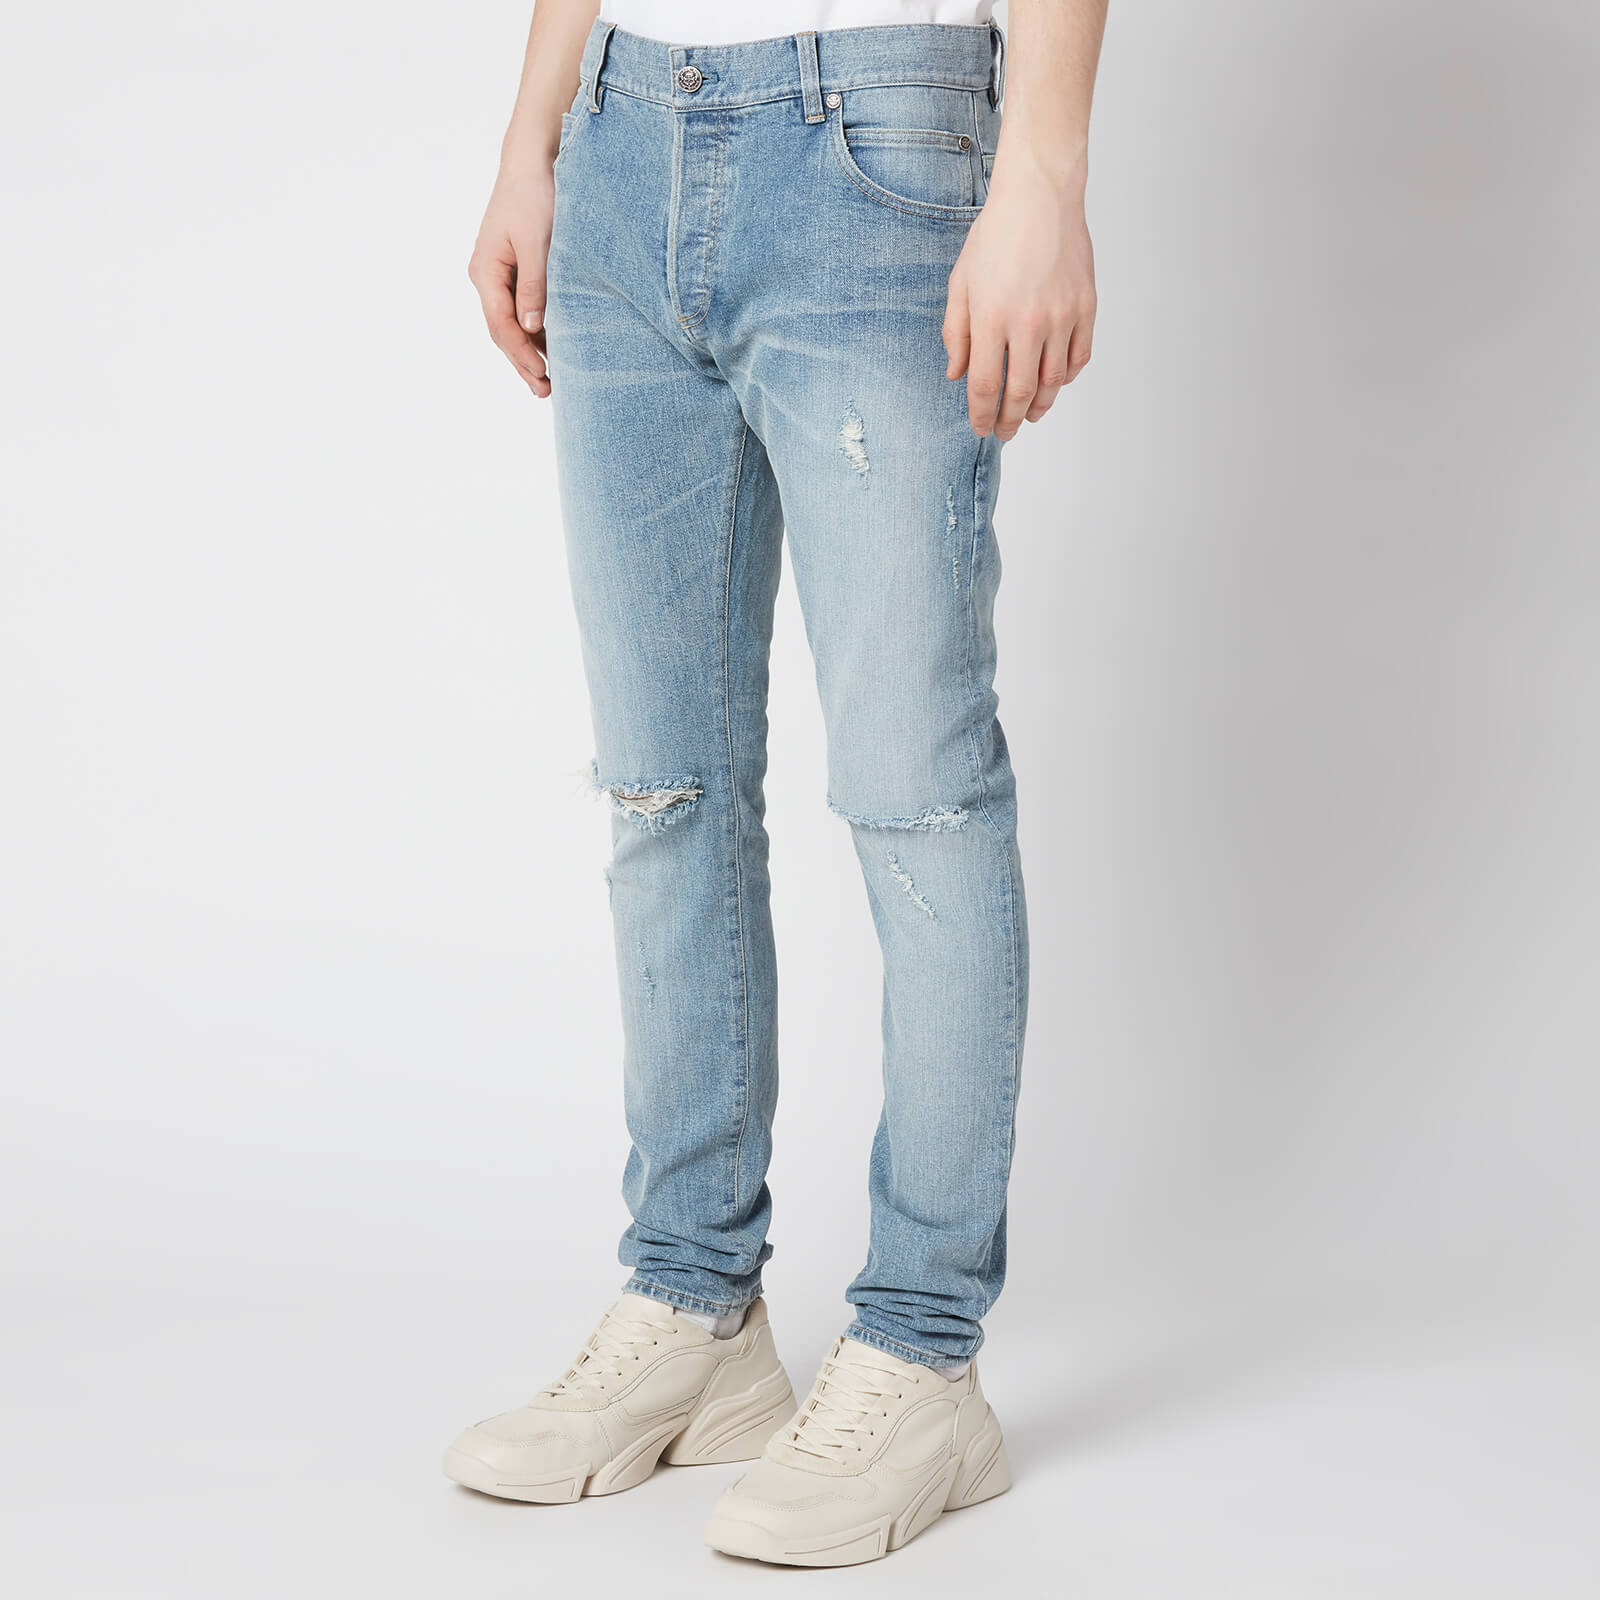 Balmain Men's Embroidered Distressed Slim Jeans - Blue - W28